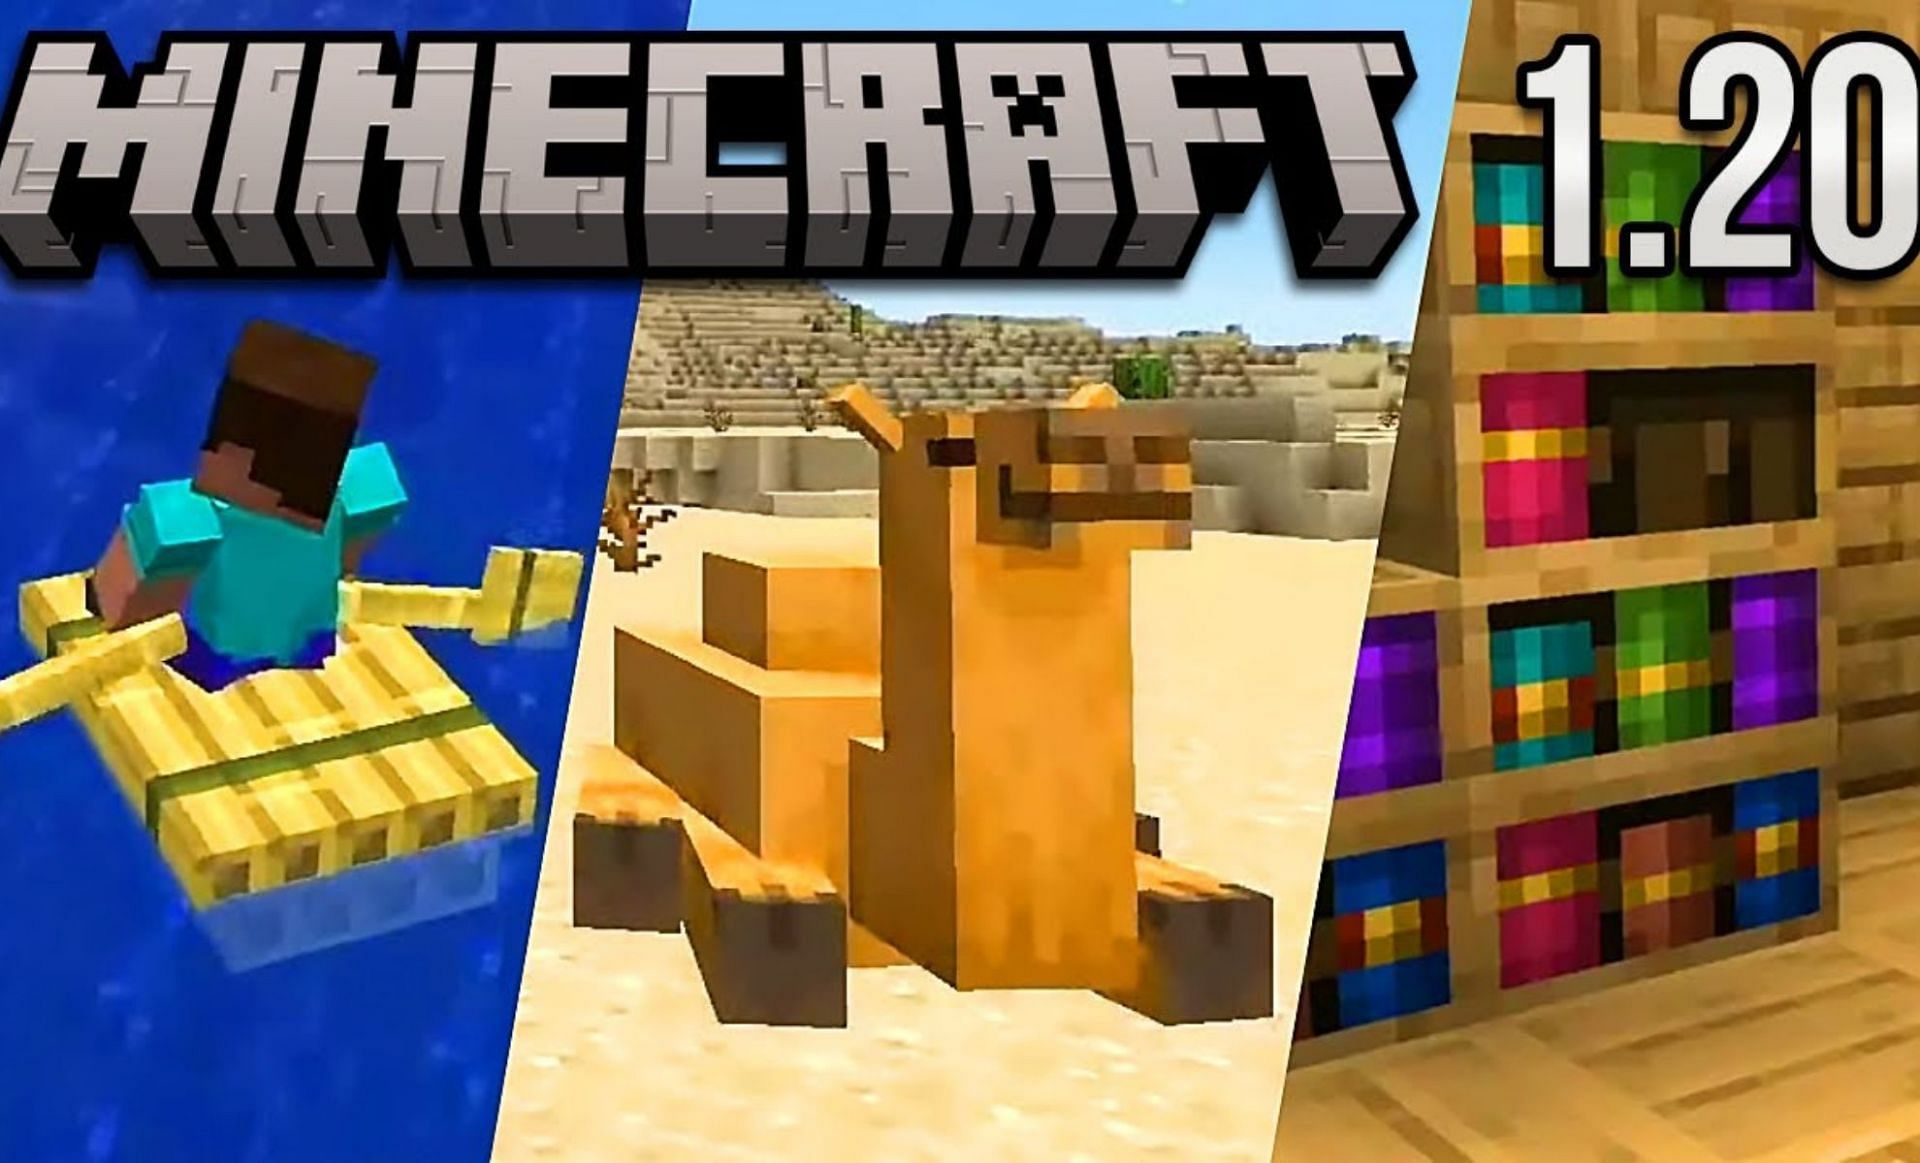 The newest snapshot has some 1.20 features (Image via CaptainSparklez on YouTube)